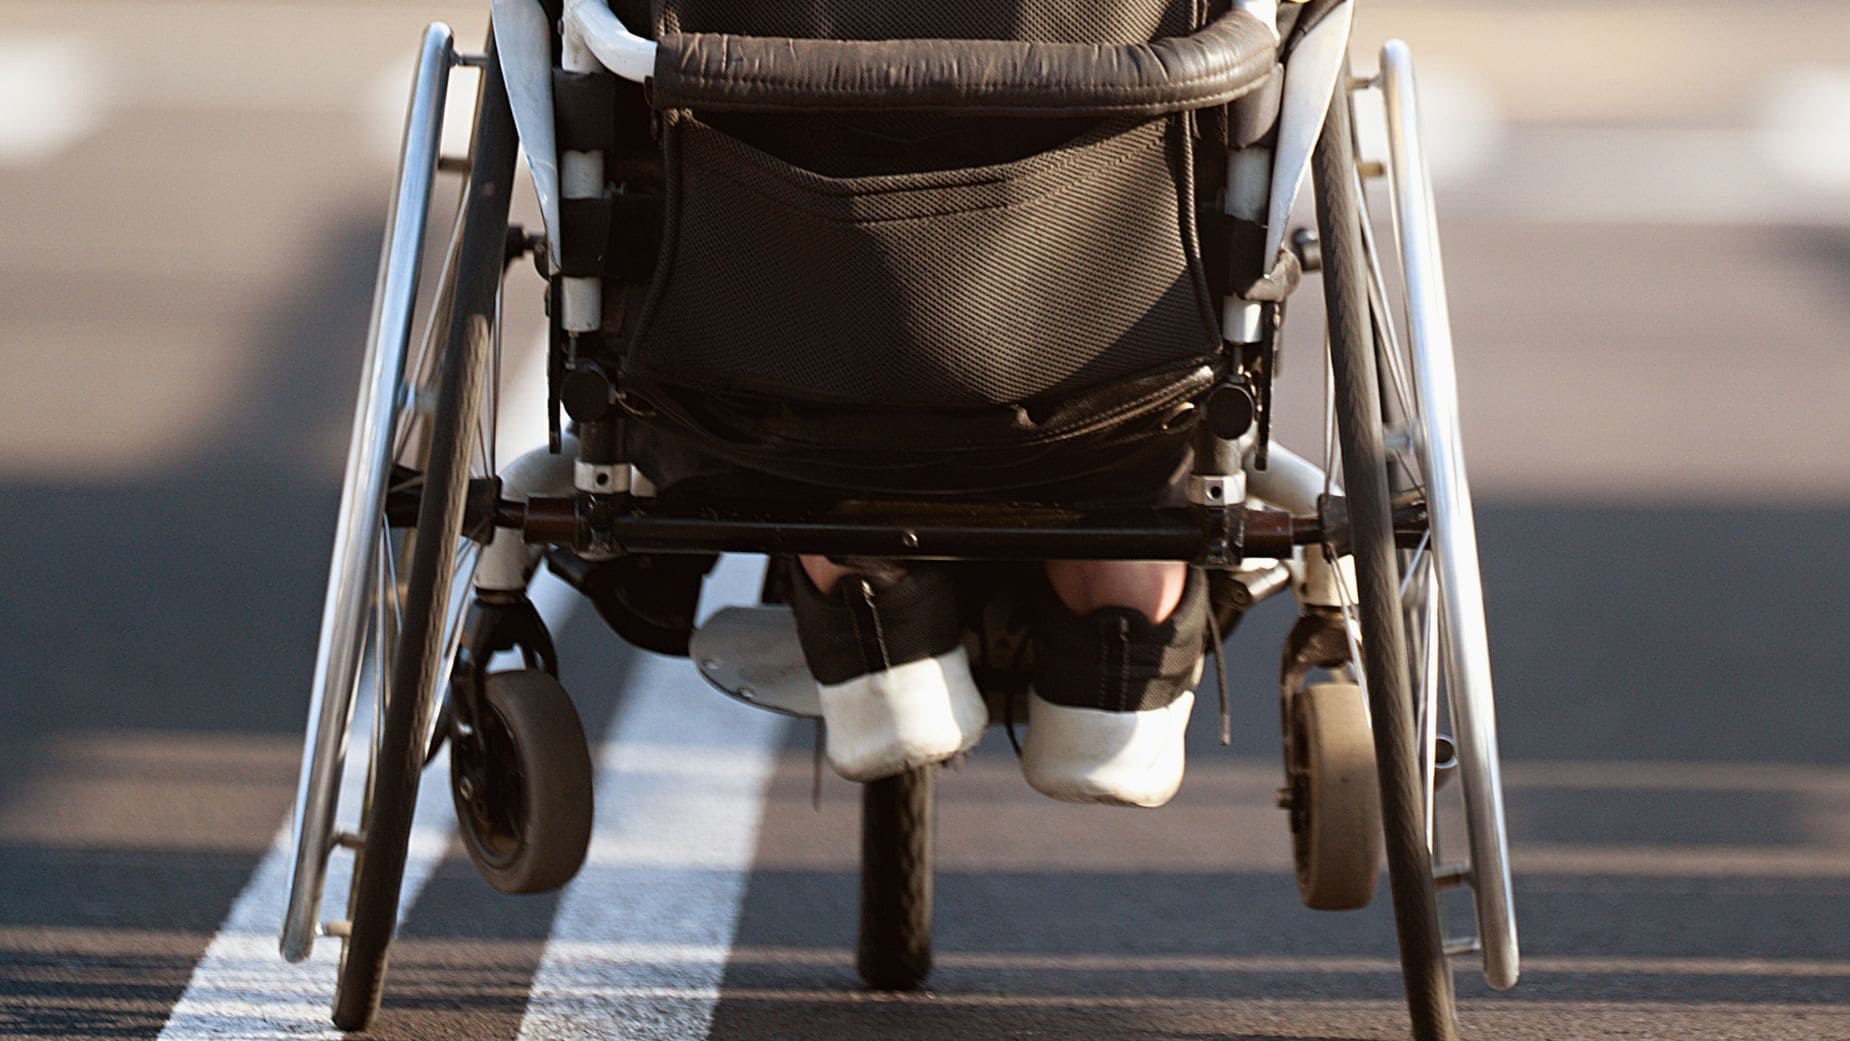 Disability Benefits arrive today to some beneficiaries